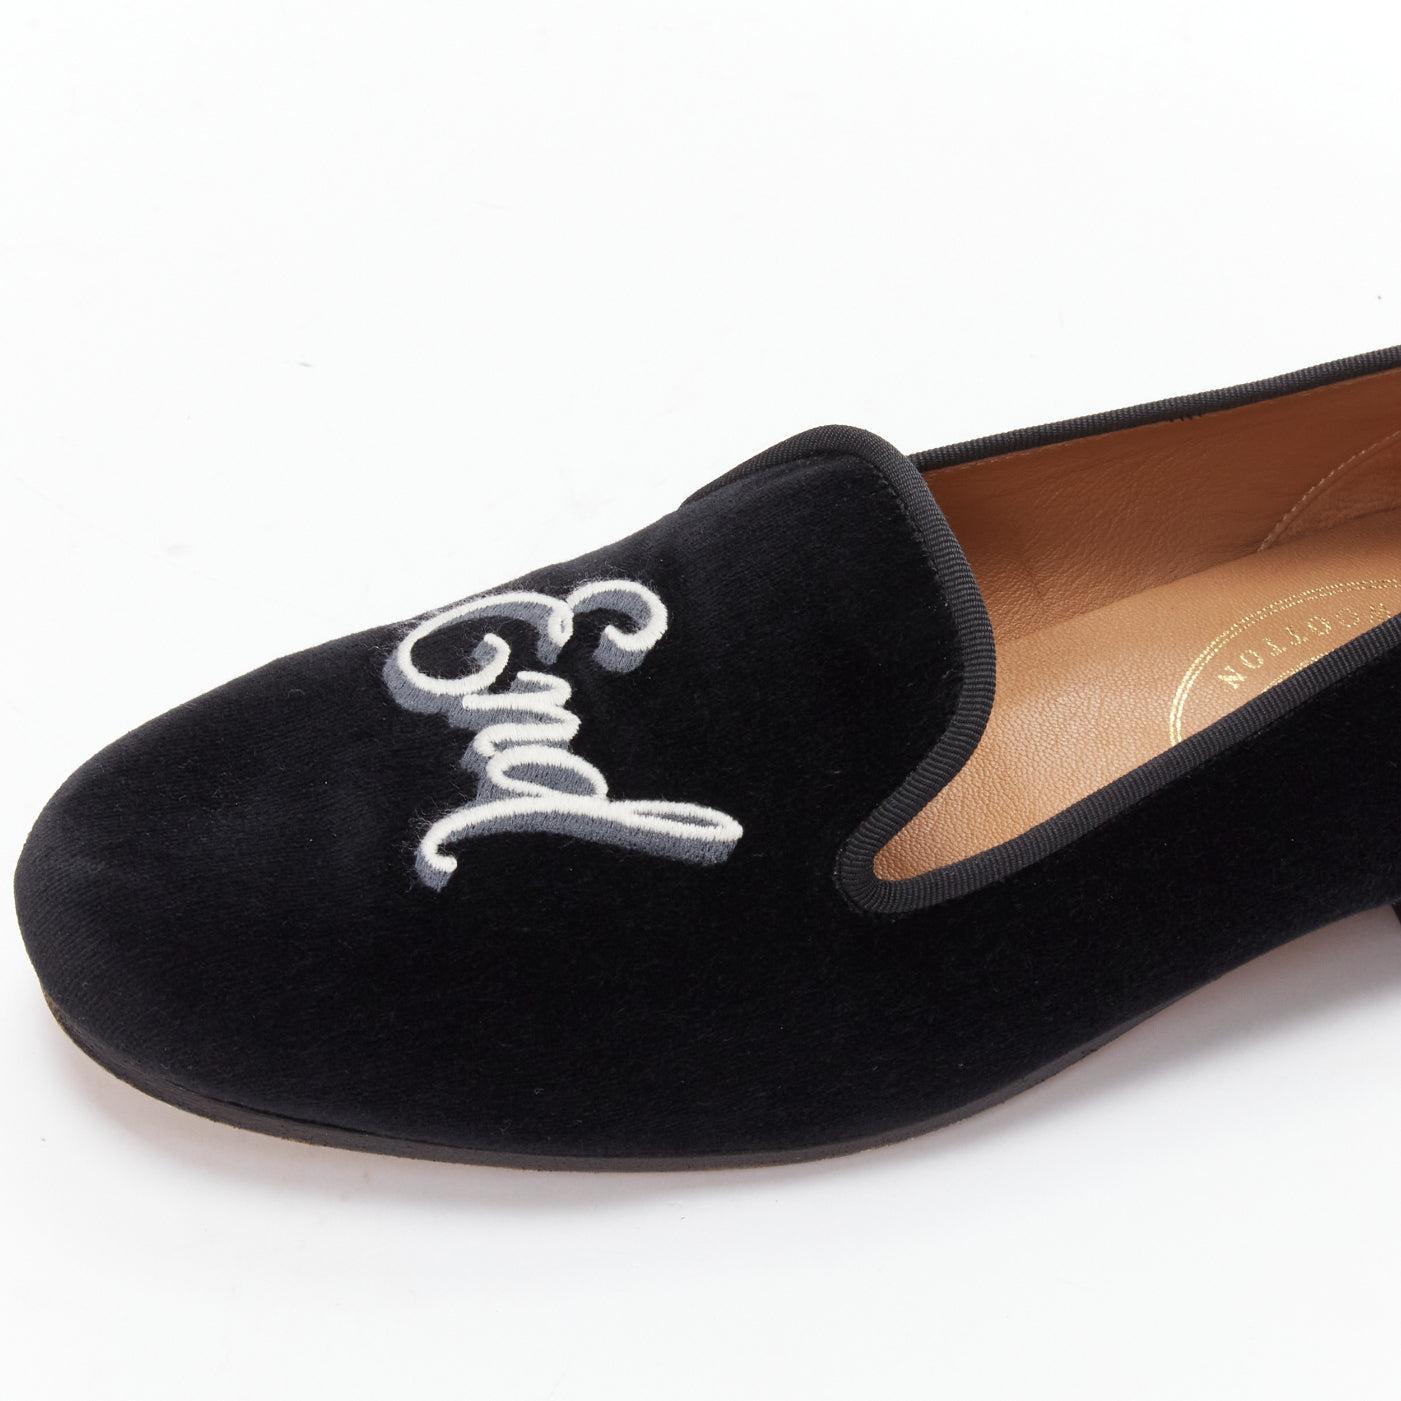 STUBBS WOOTTON The End embroidery black velvet loafer smoking slippers US9 EU42 2